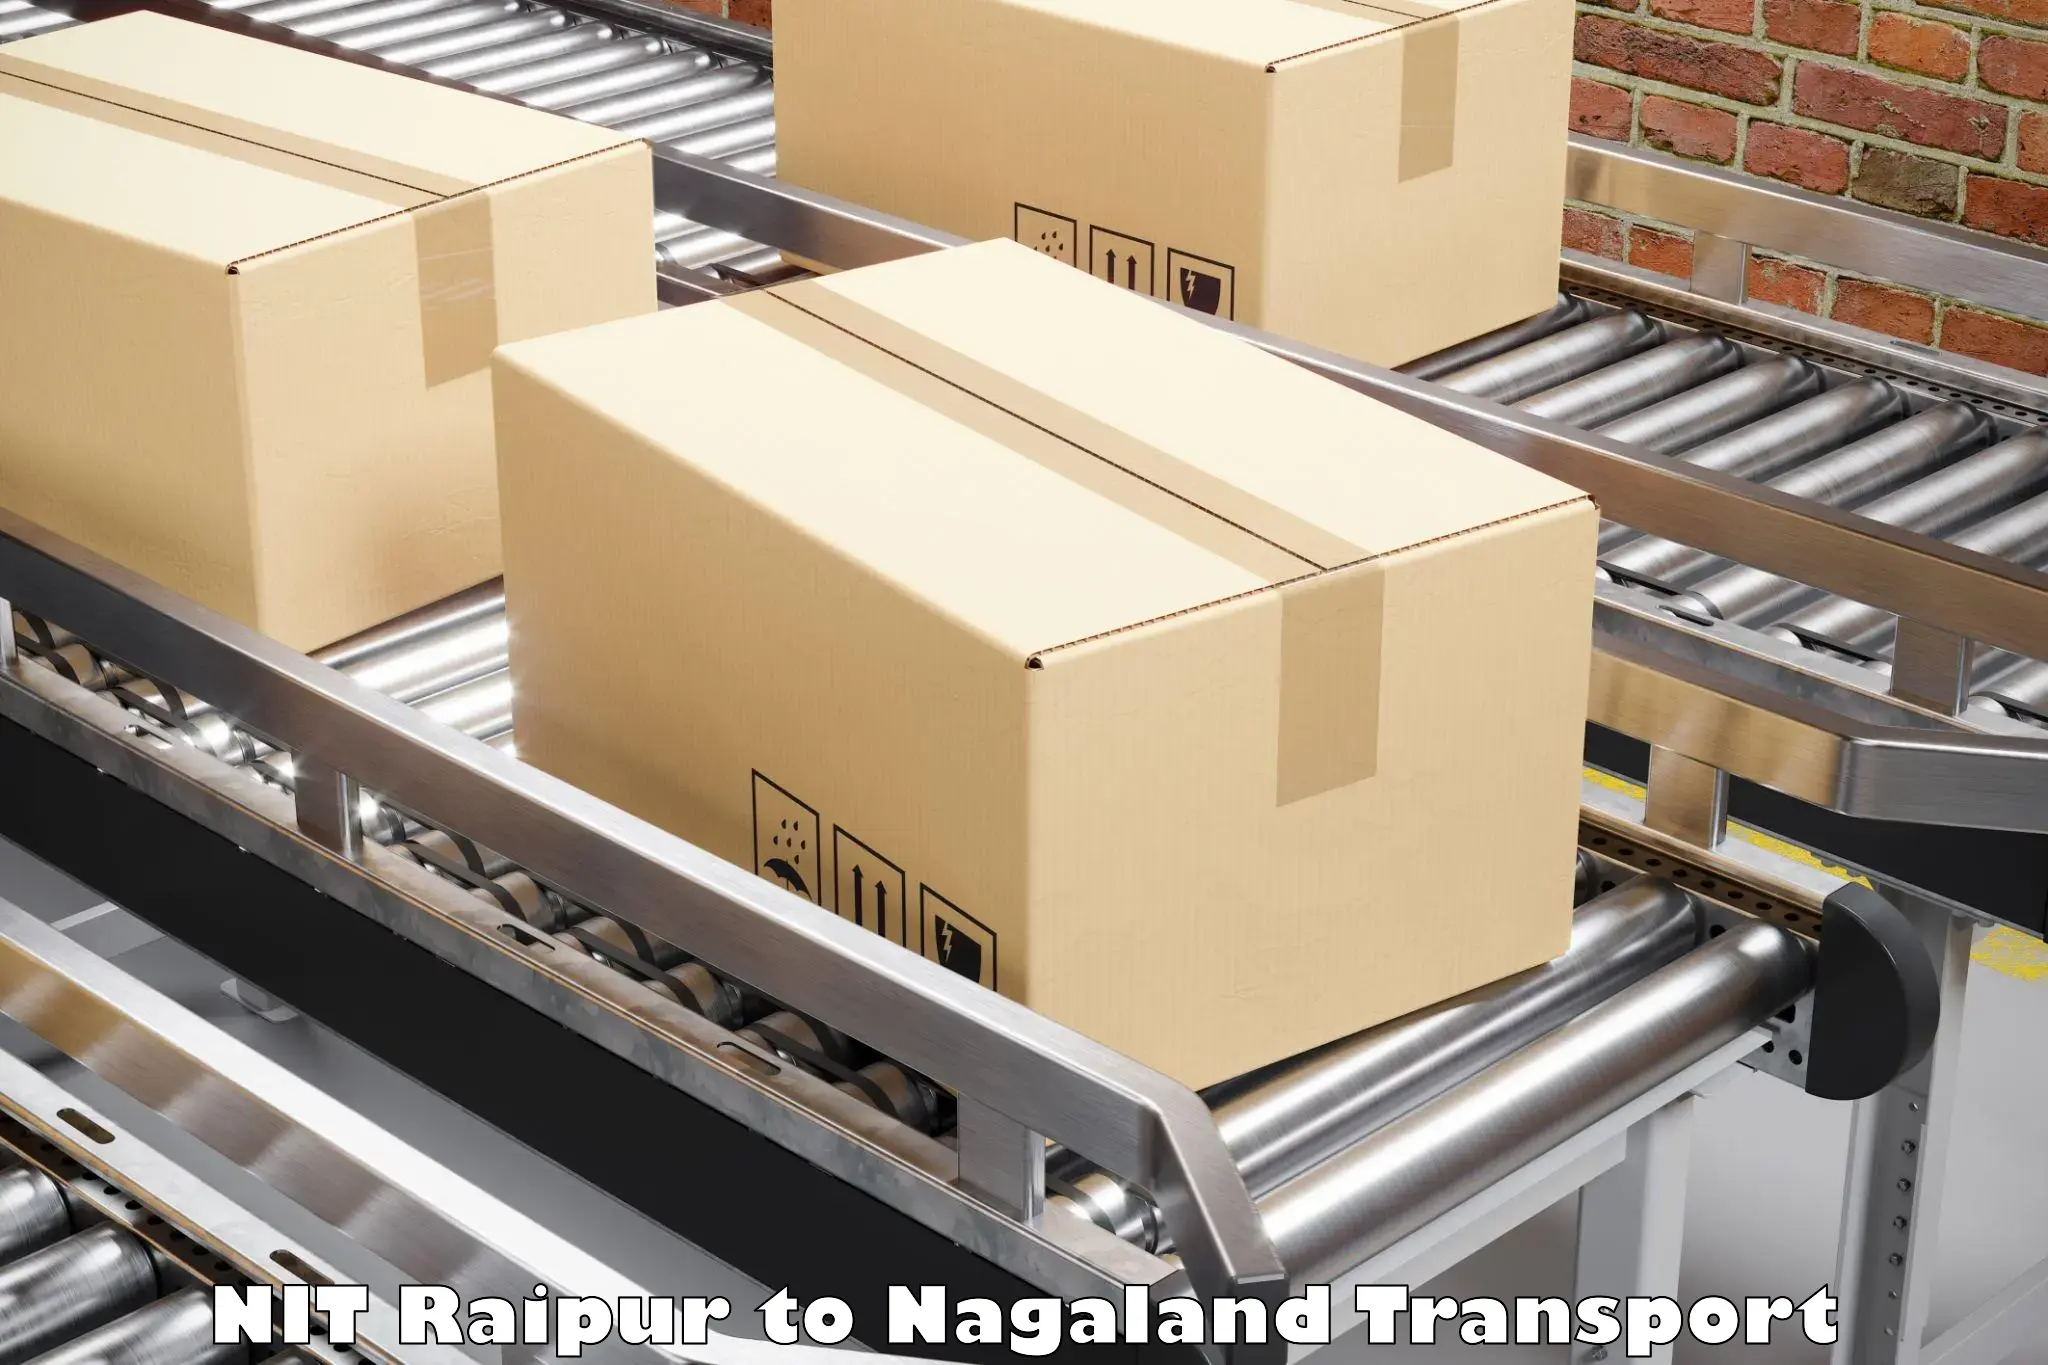 Daily parcel service transport NIT Raipur to Nagaland